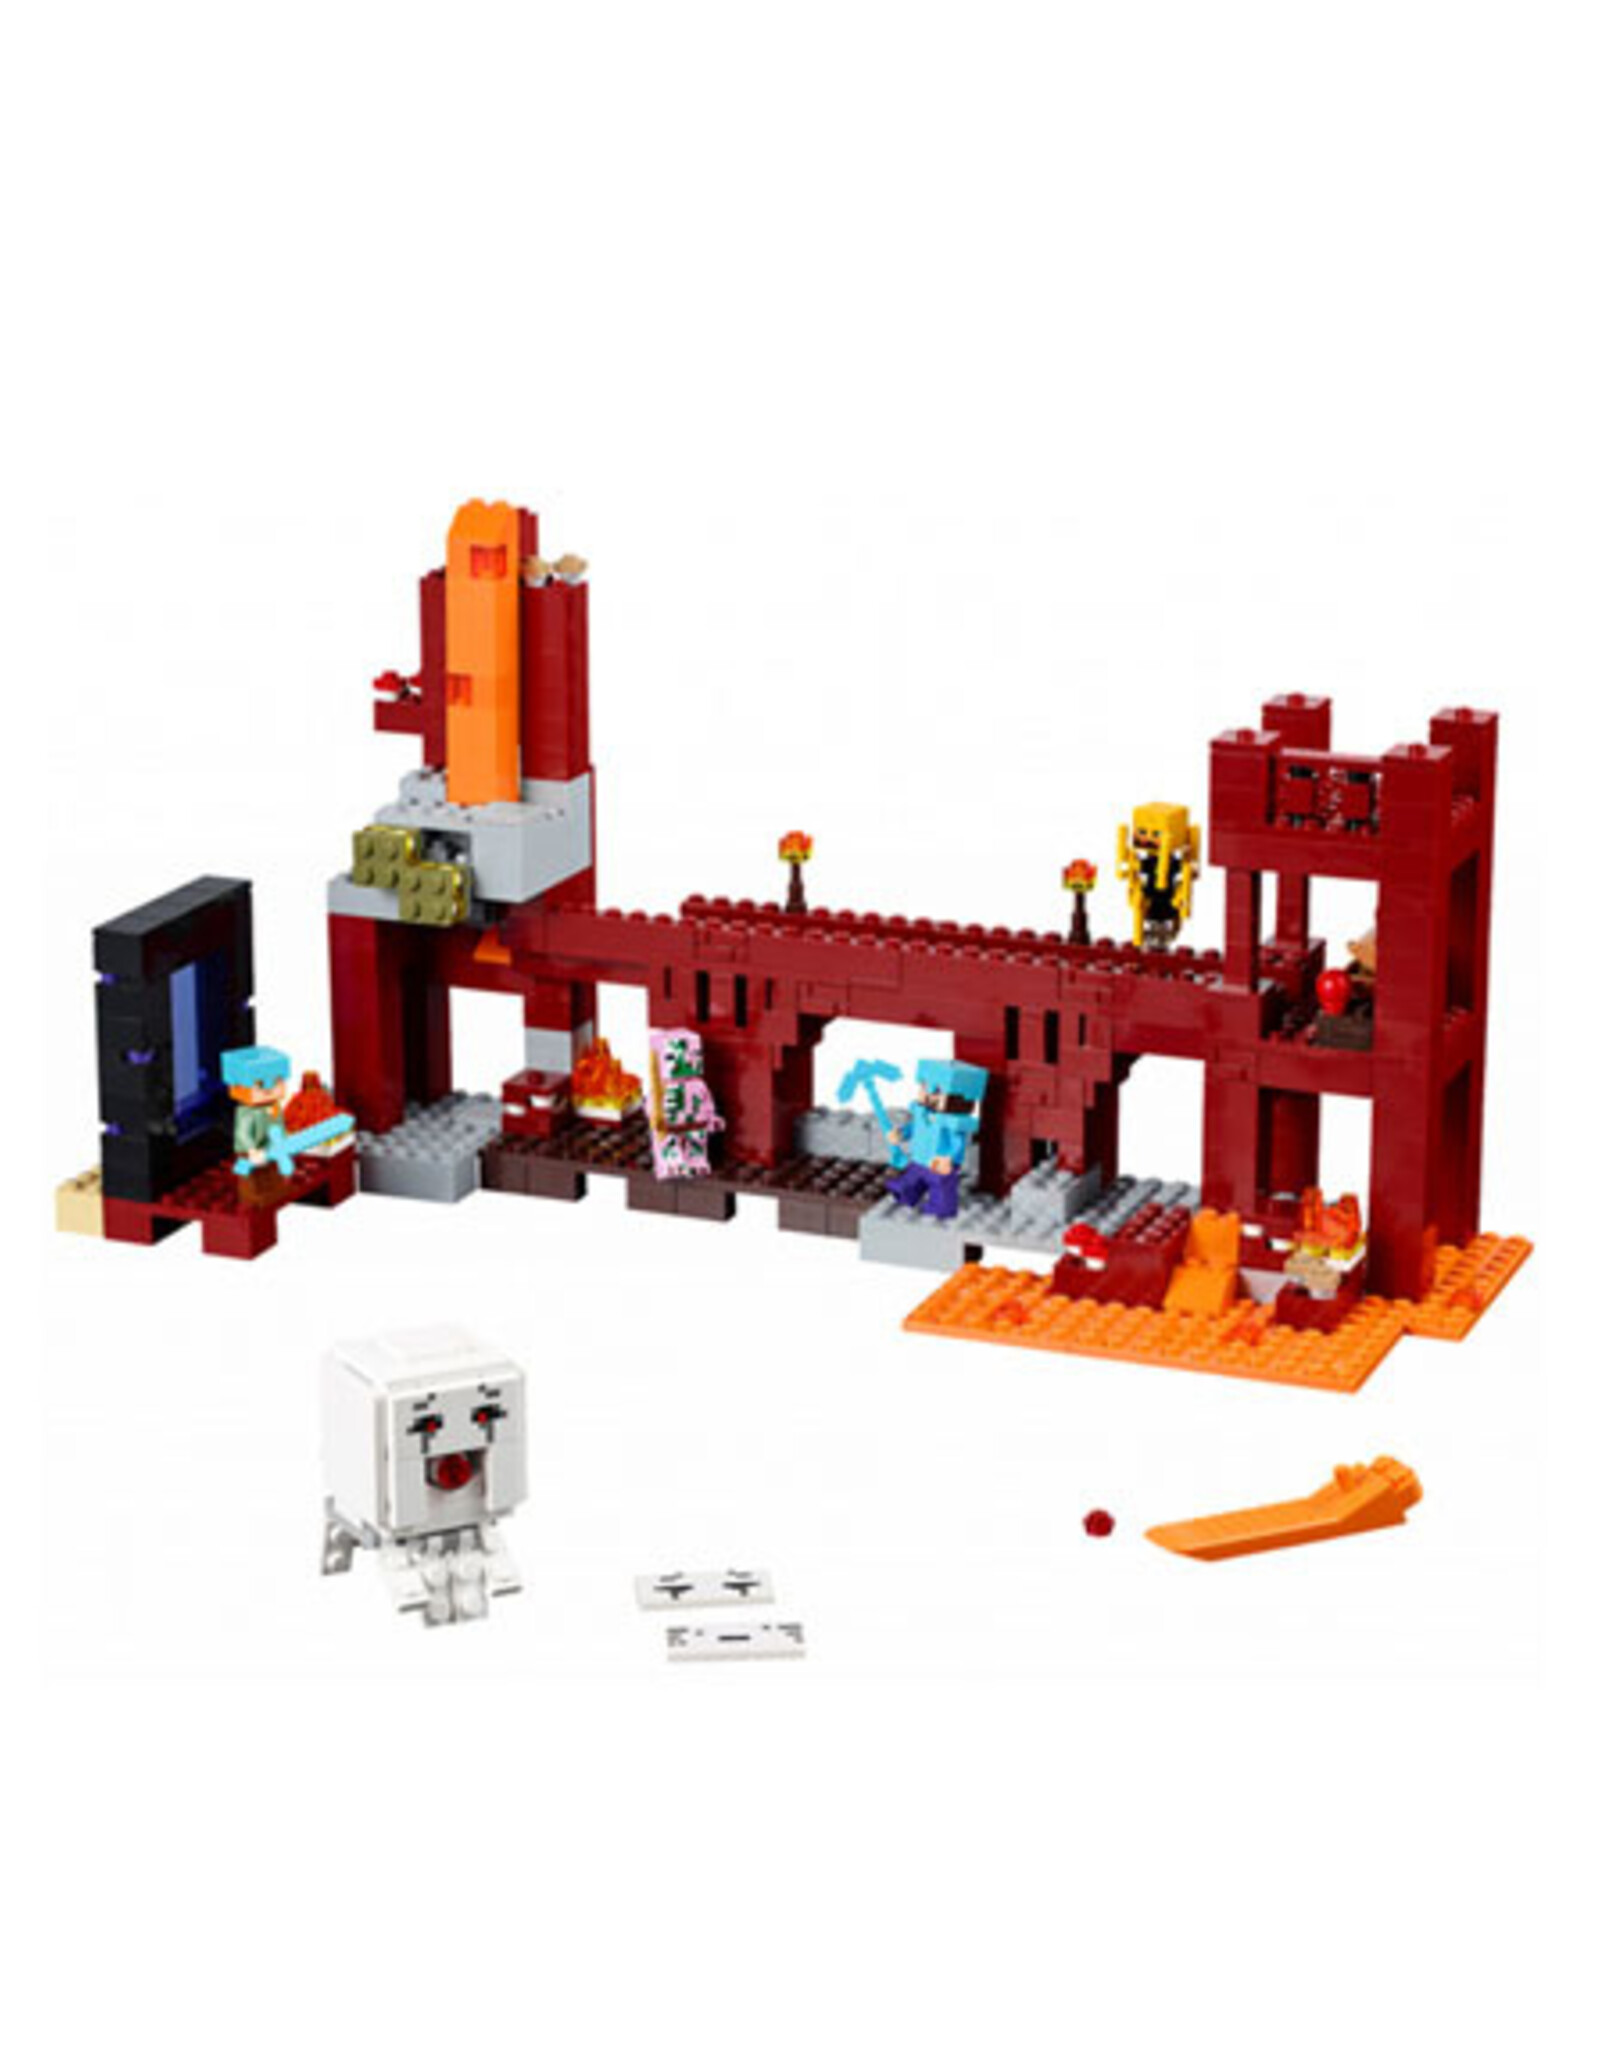 LEGO LEGO 21122 The Nether Fortress MINECRAFT